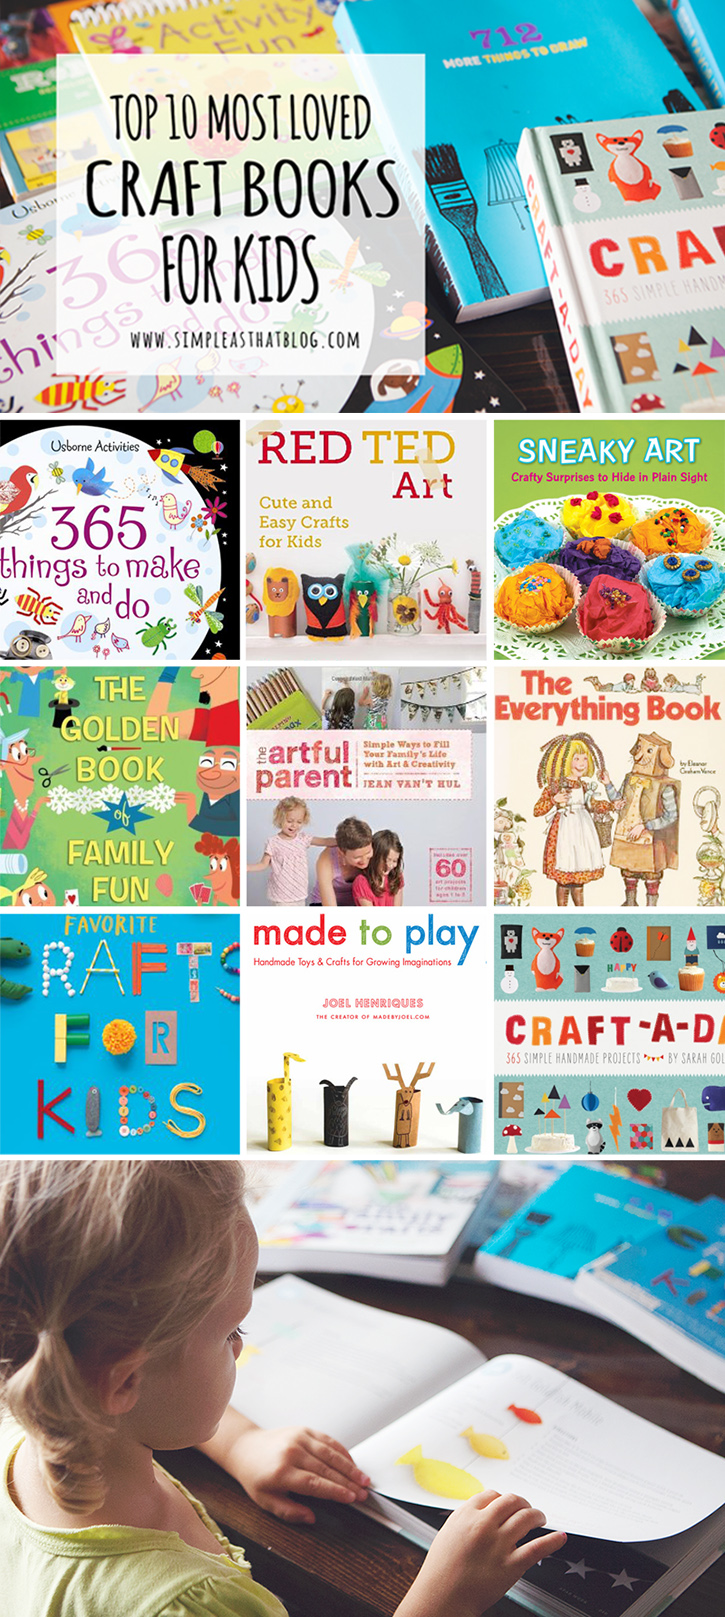 Top 10 Most Loved Craft Books for Kids